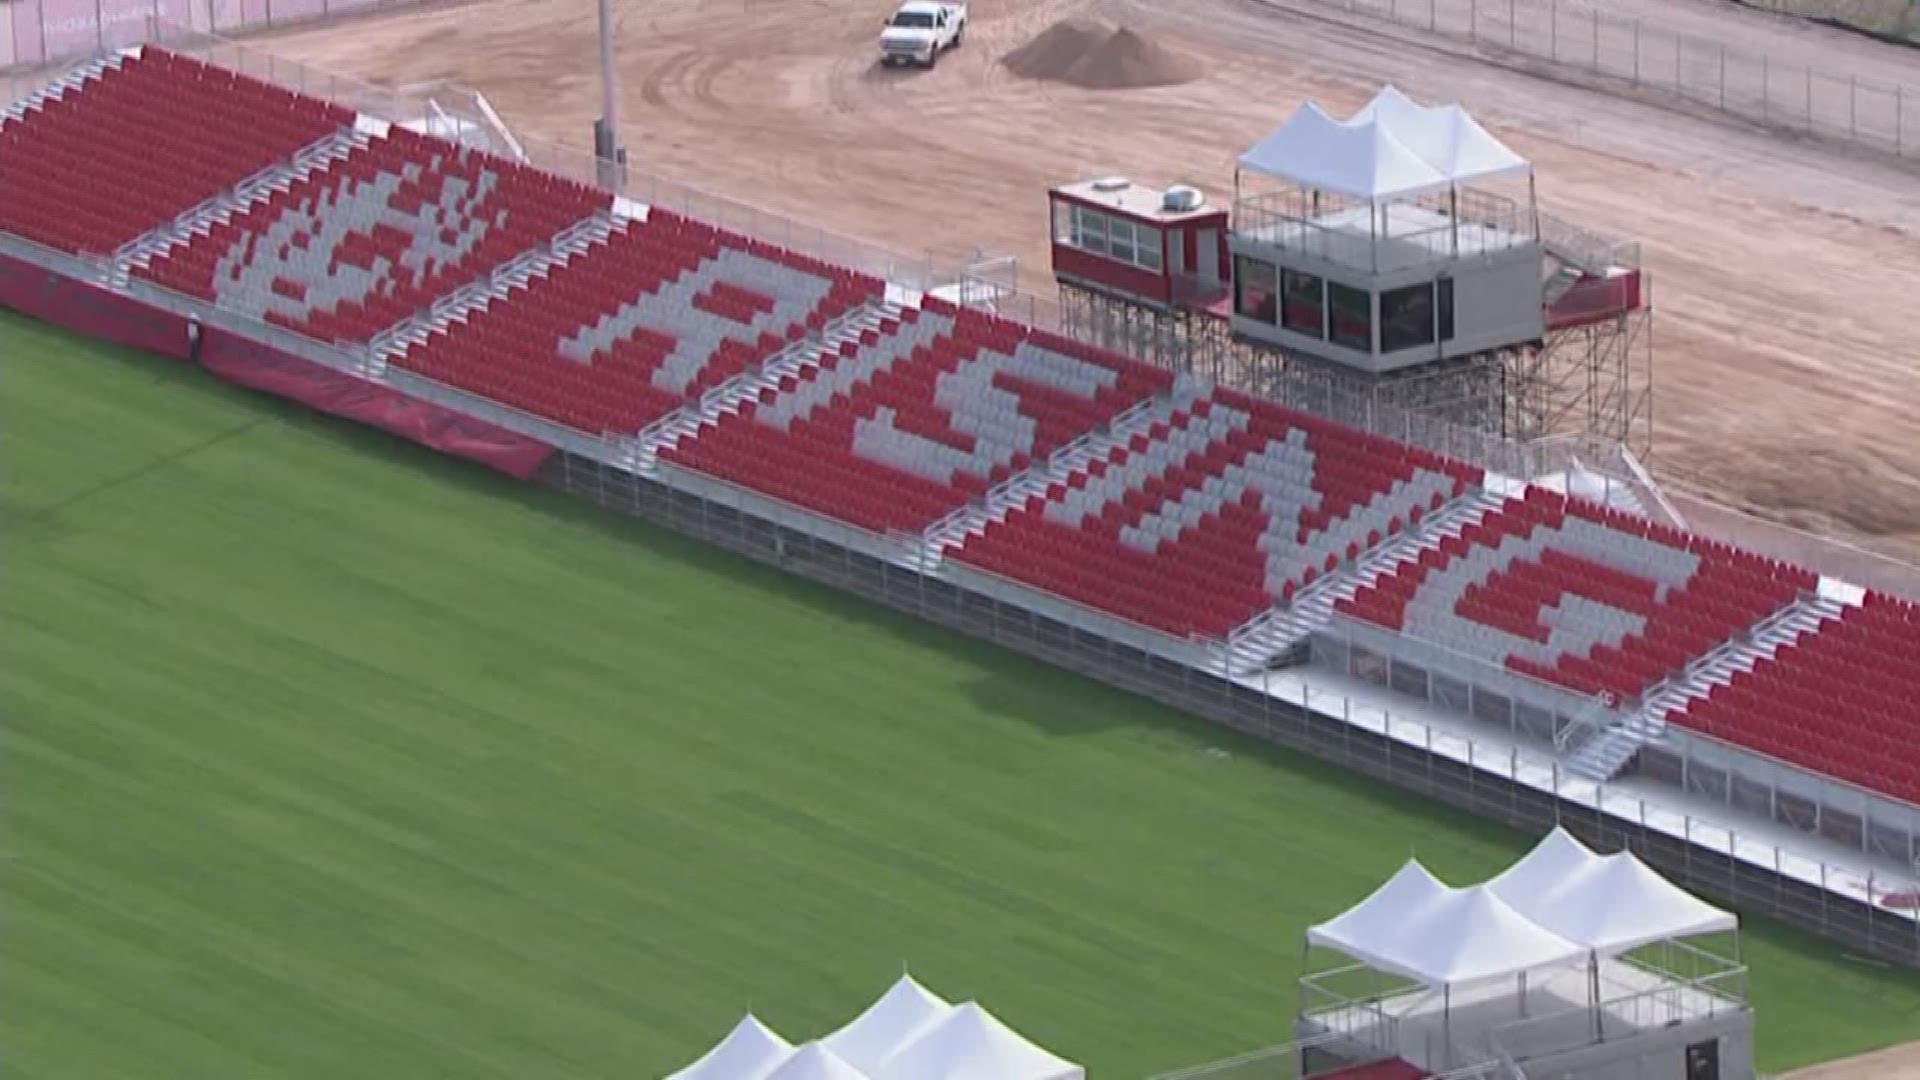 Meet the new home of Arizona's only professional soccer team, Phoenix Rising.